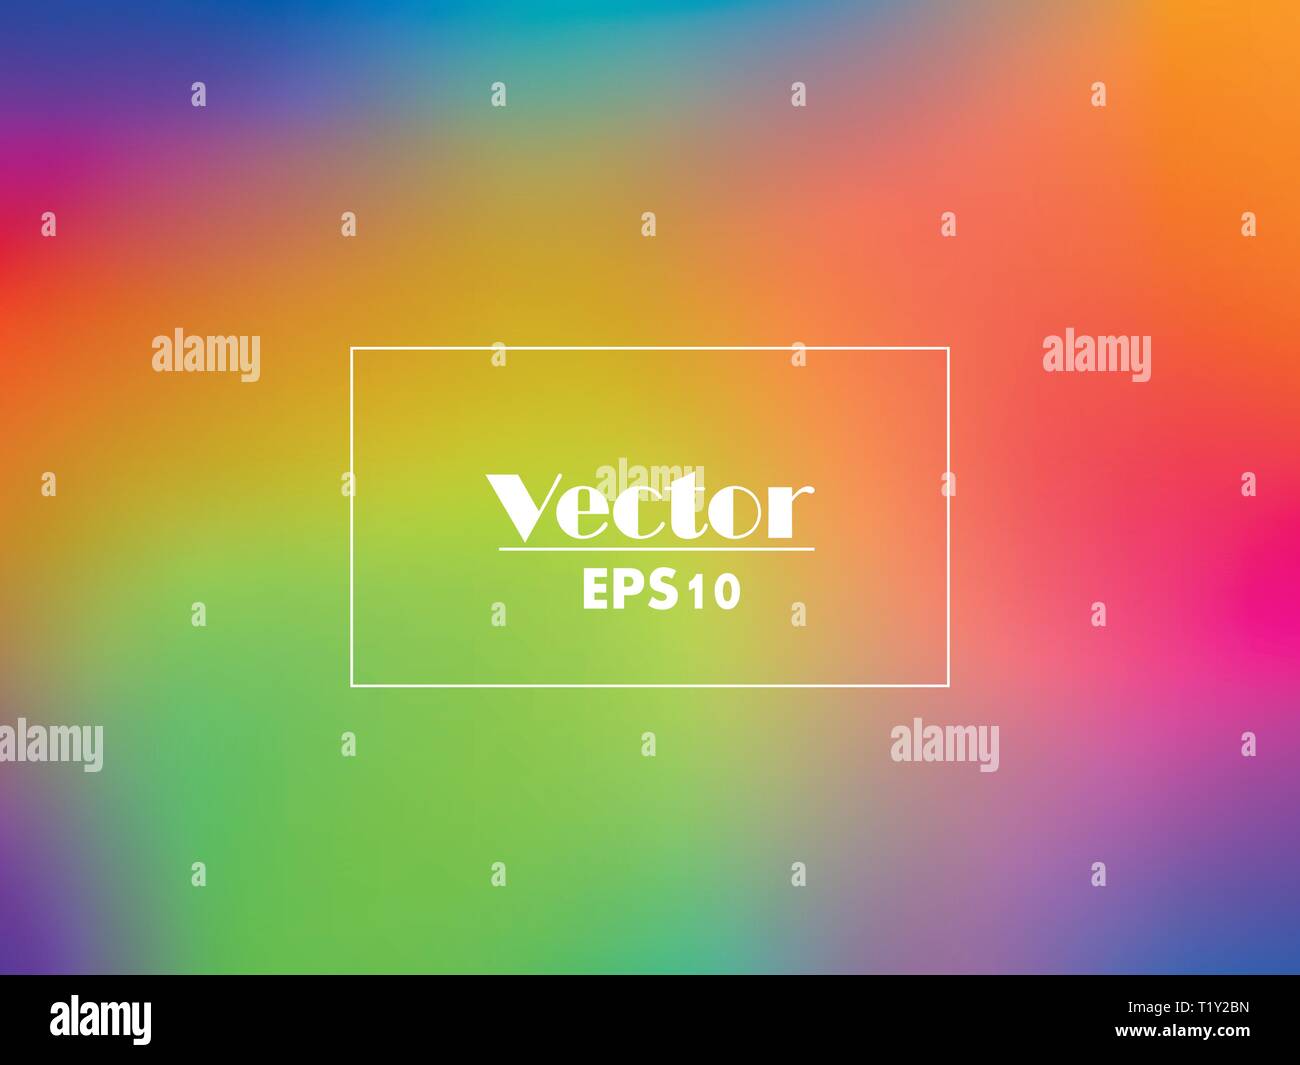 Gradient mesh color background. New abstract modern screen vector design for mobile app. Soft color gradients. Rectangular shape pattern. Stock Vector